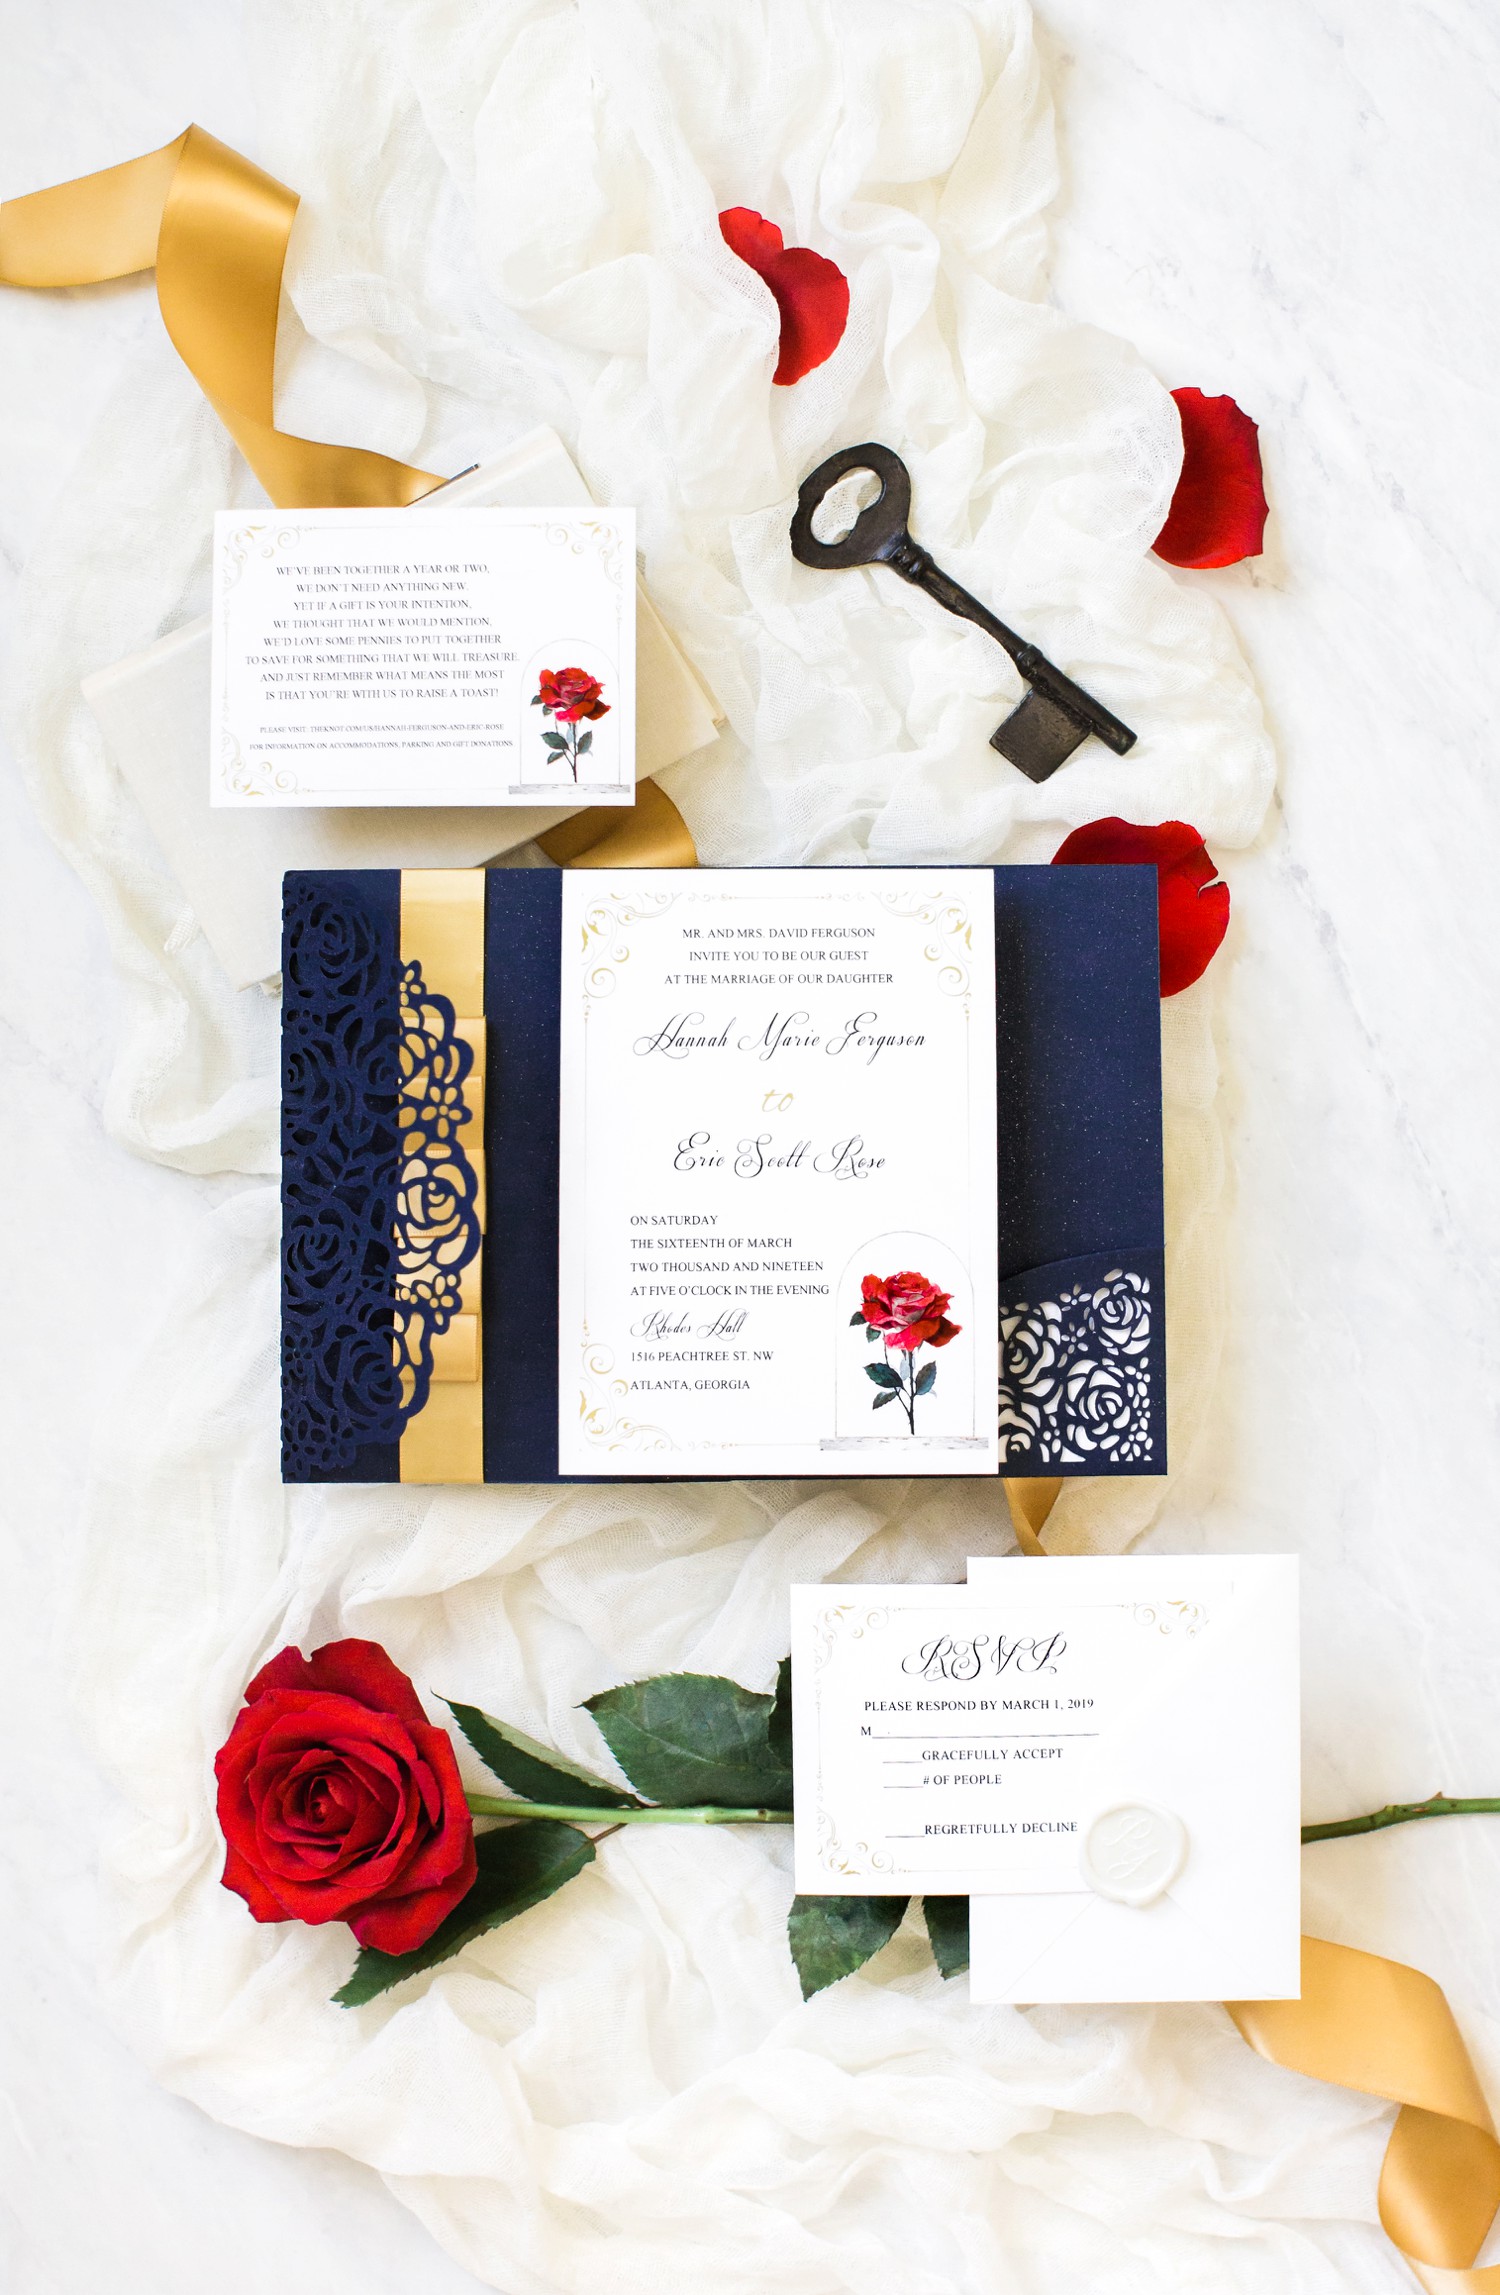 Beauty and the beast inspired wedding invitations